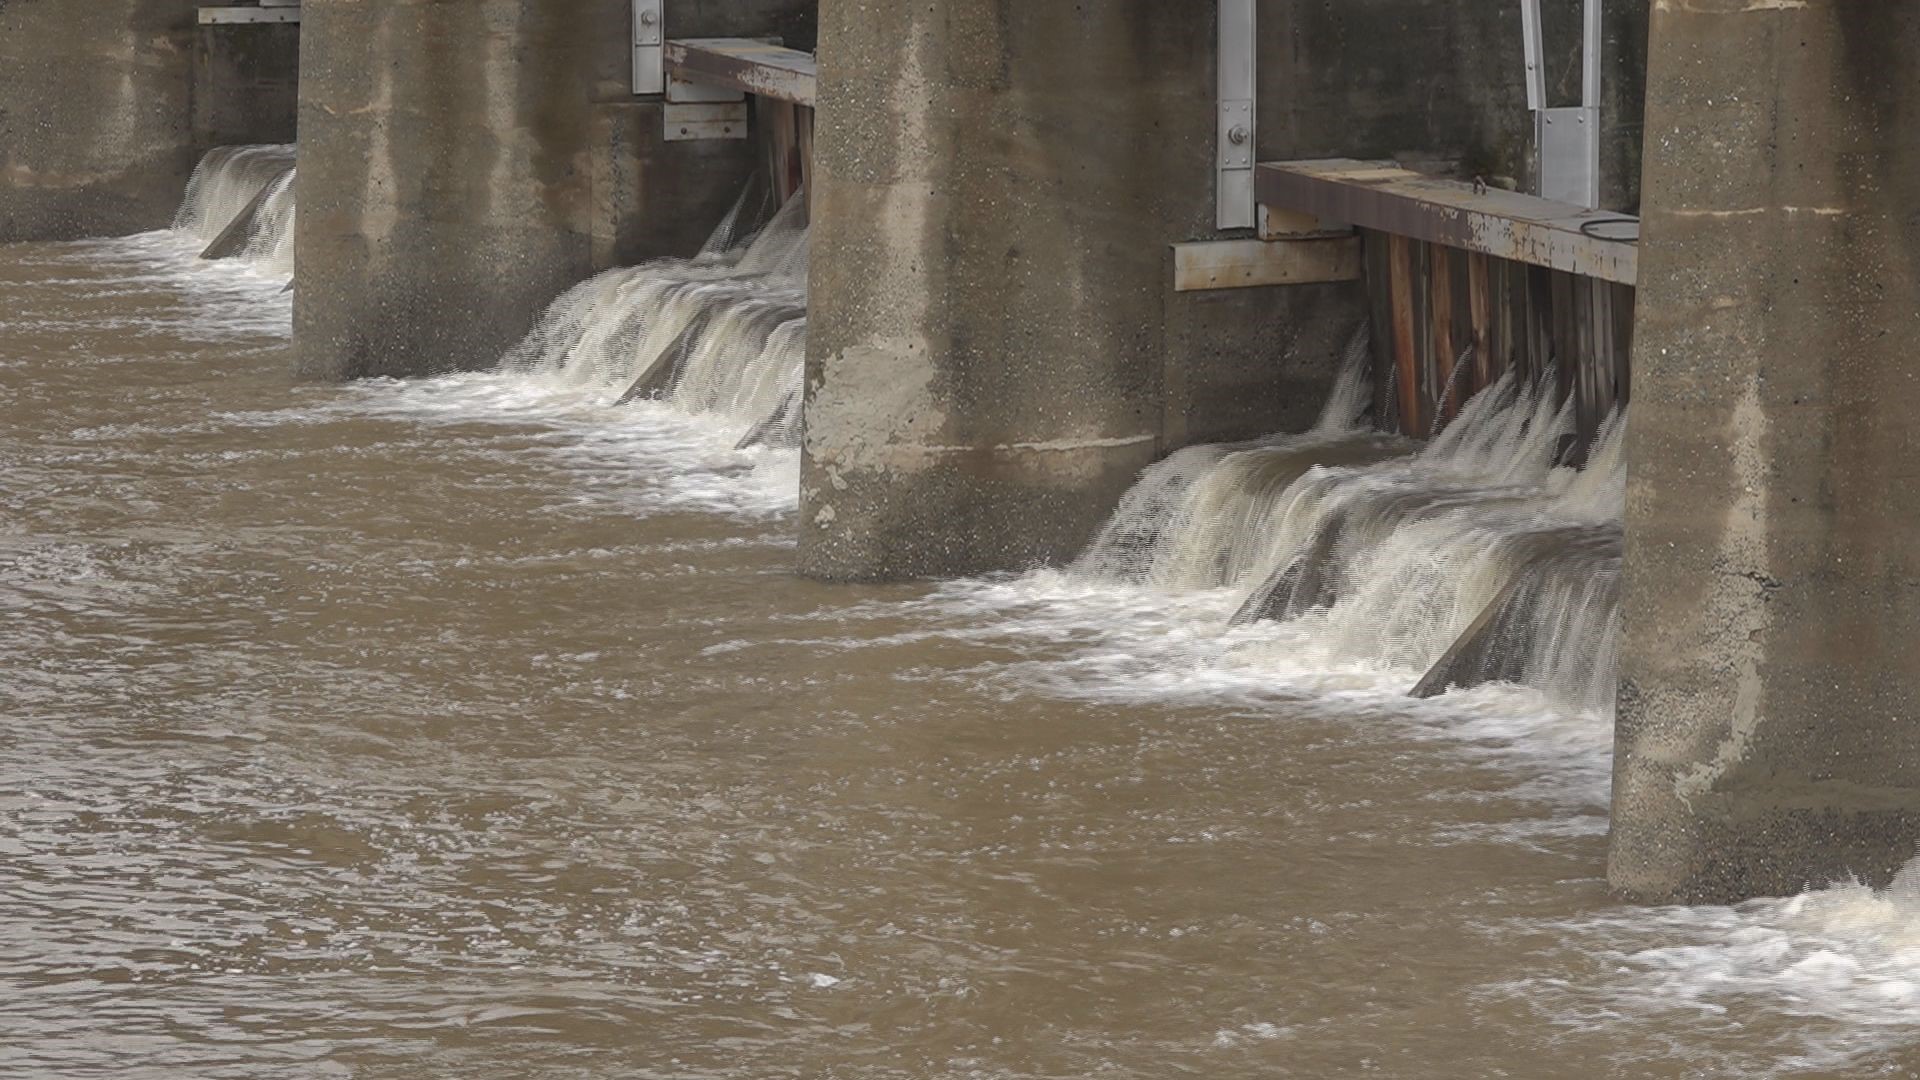 After what feels like weeks of constant rain, water levels in the many creeks and rivers around Sacramento County have continued to increase.